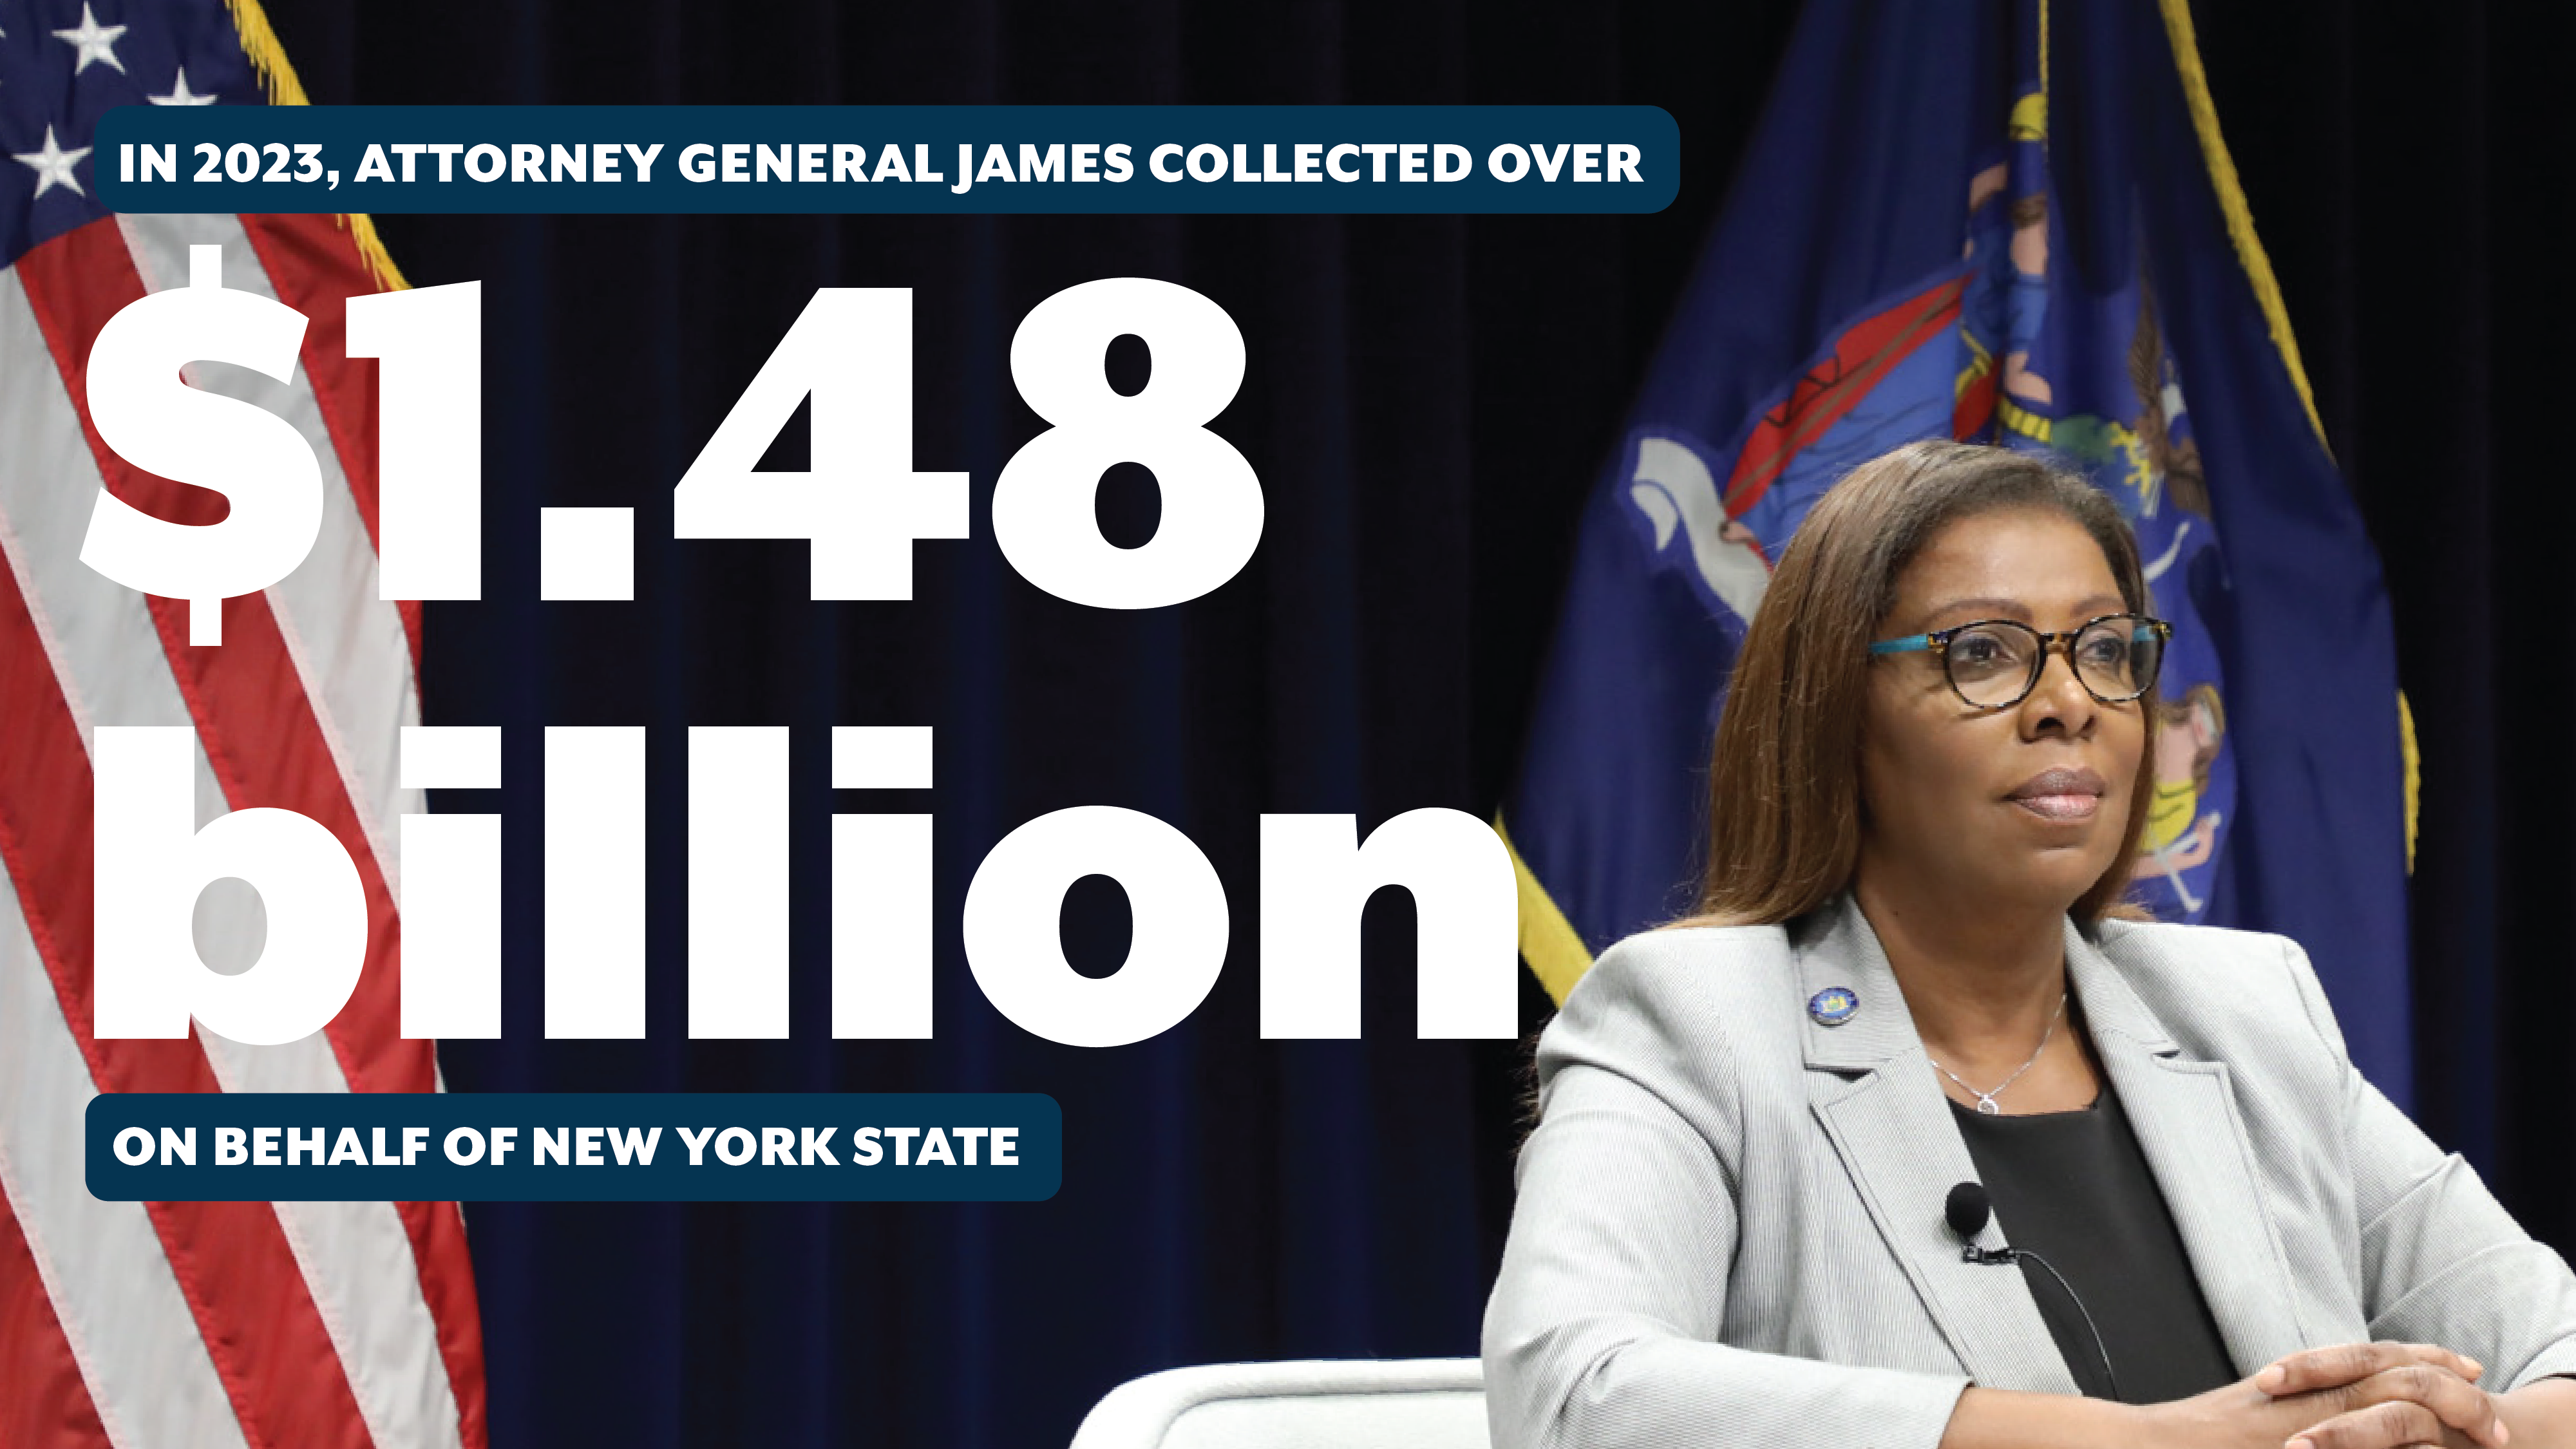 In 2023, Attorney General James collected over 1.48 billion on behalf of New York state